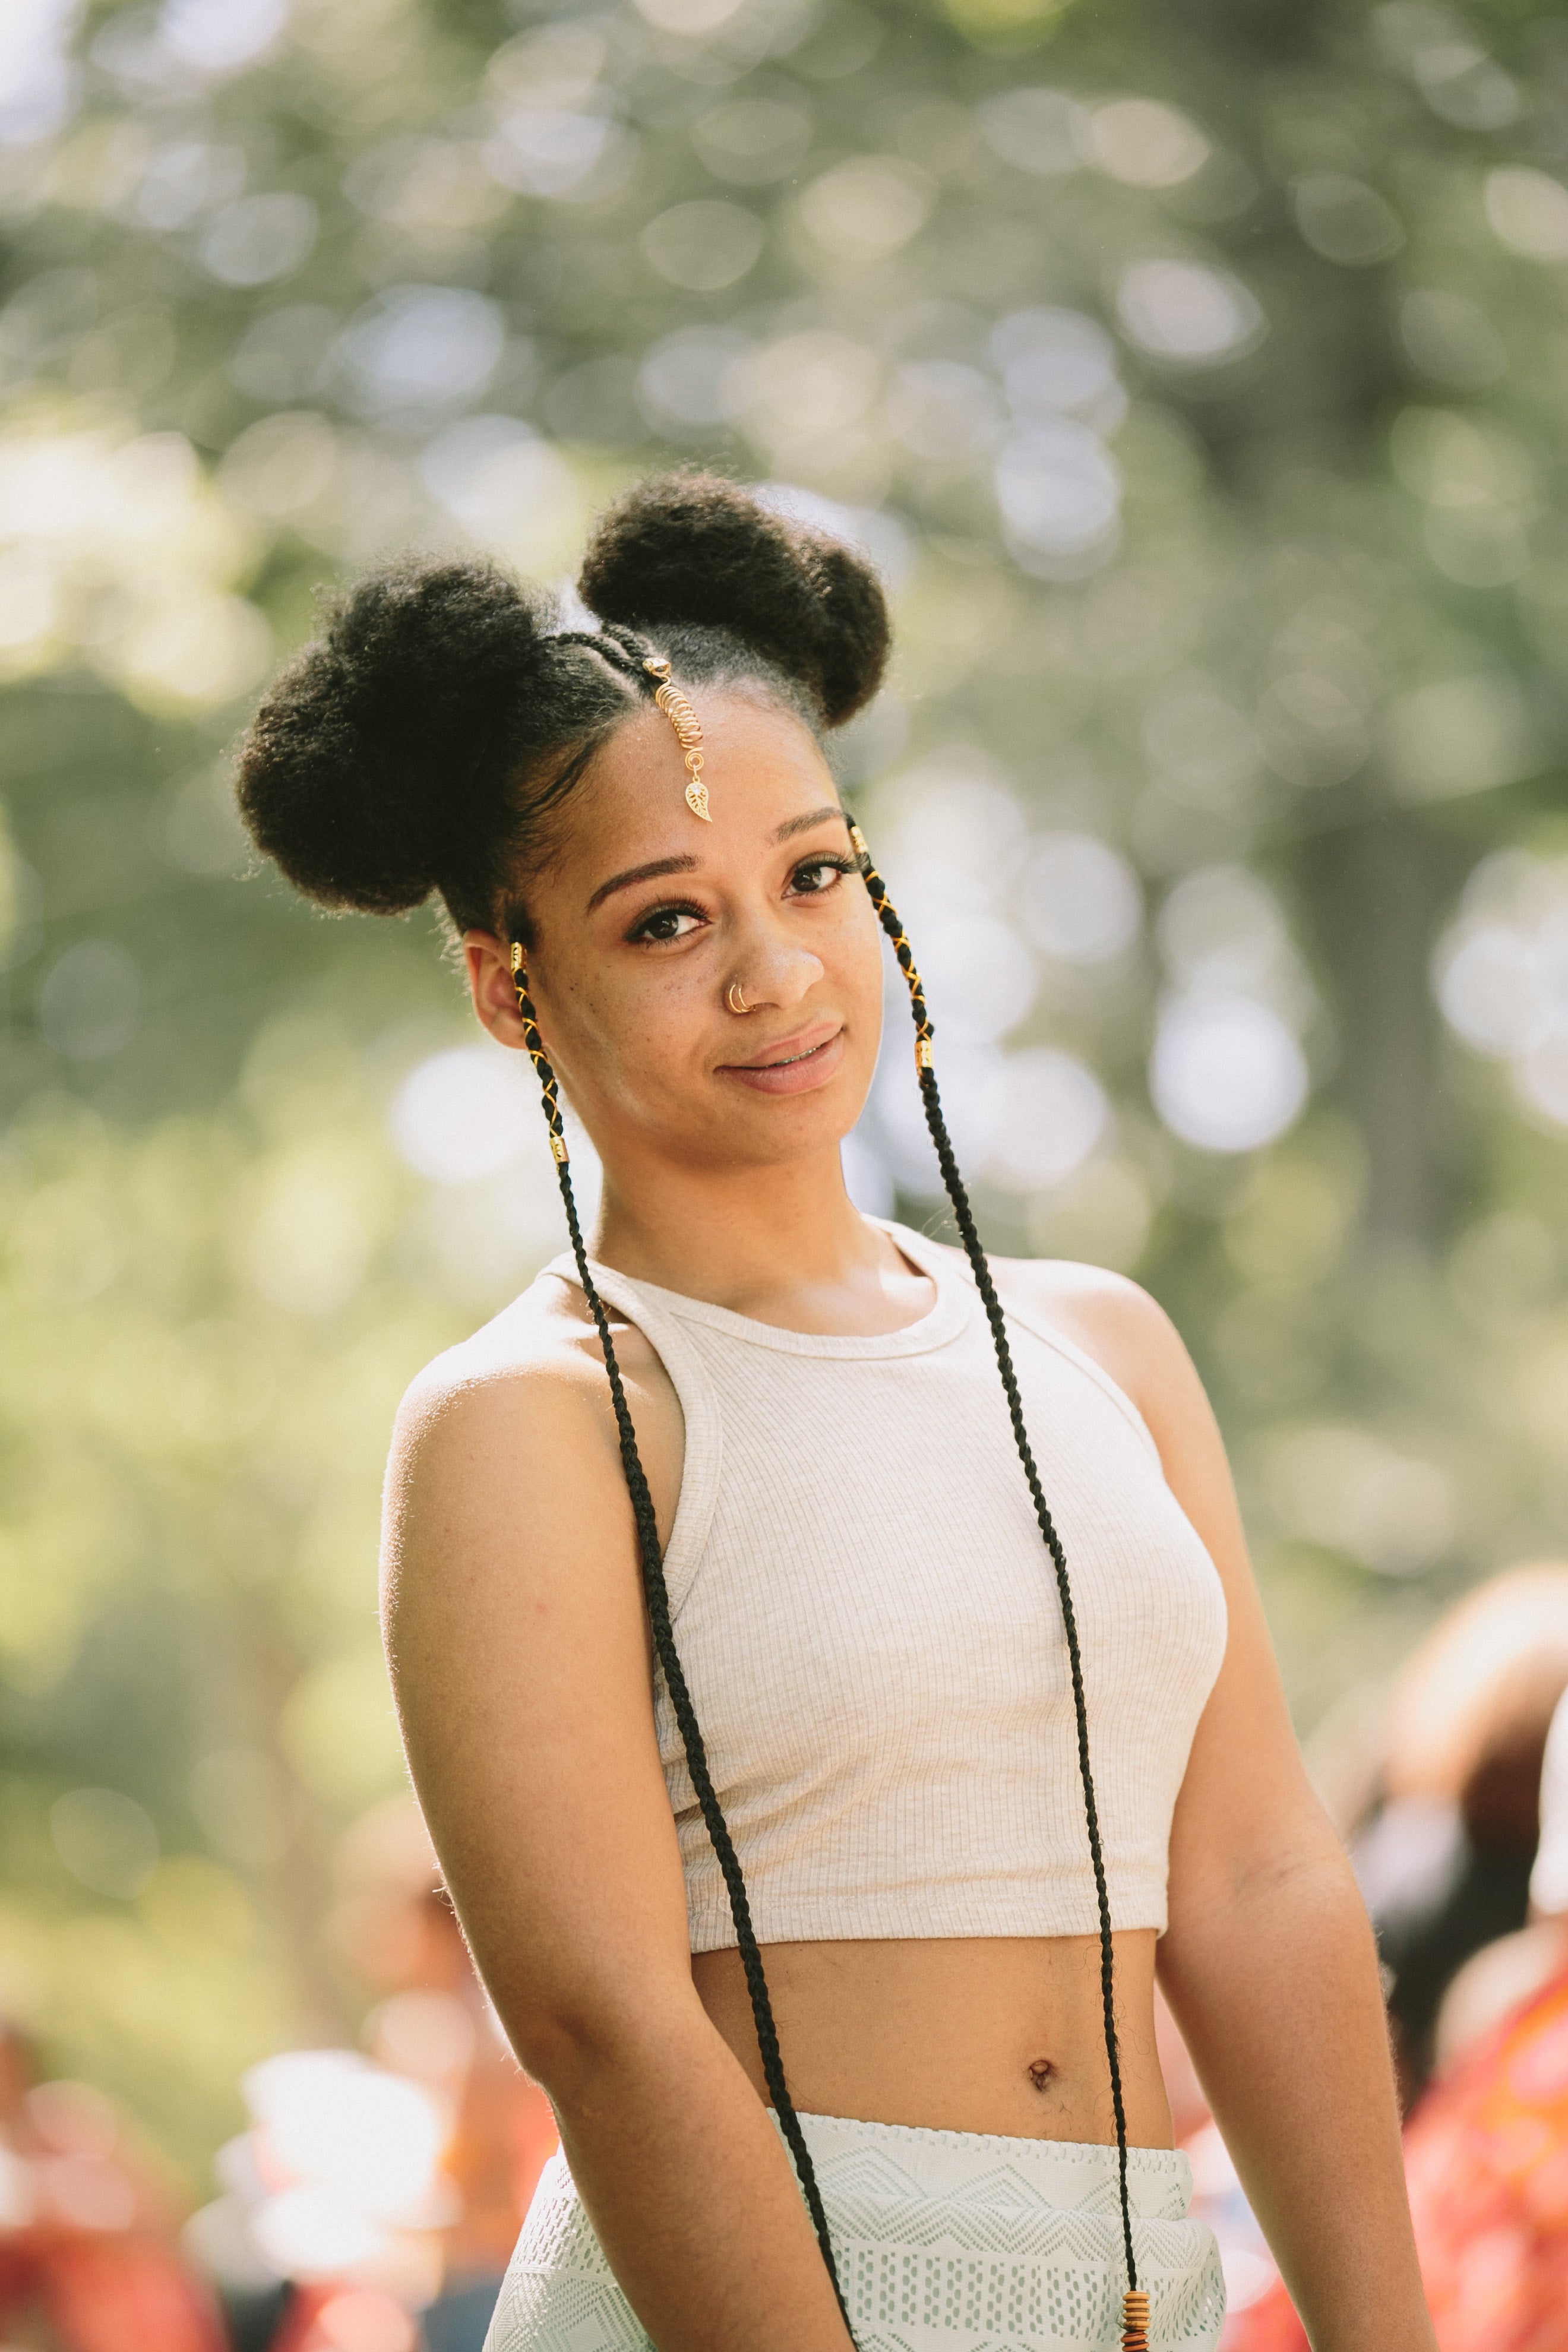 25 Creative Ponytails And Buns From Curlfest Atlanta We Want To Try